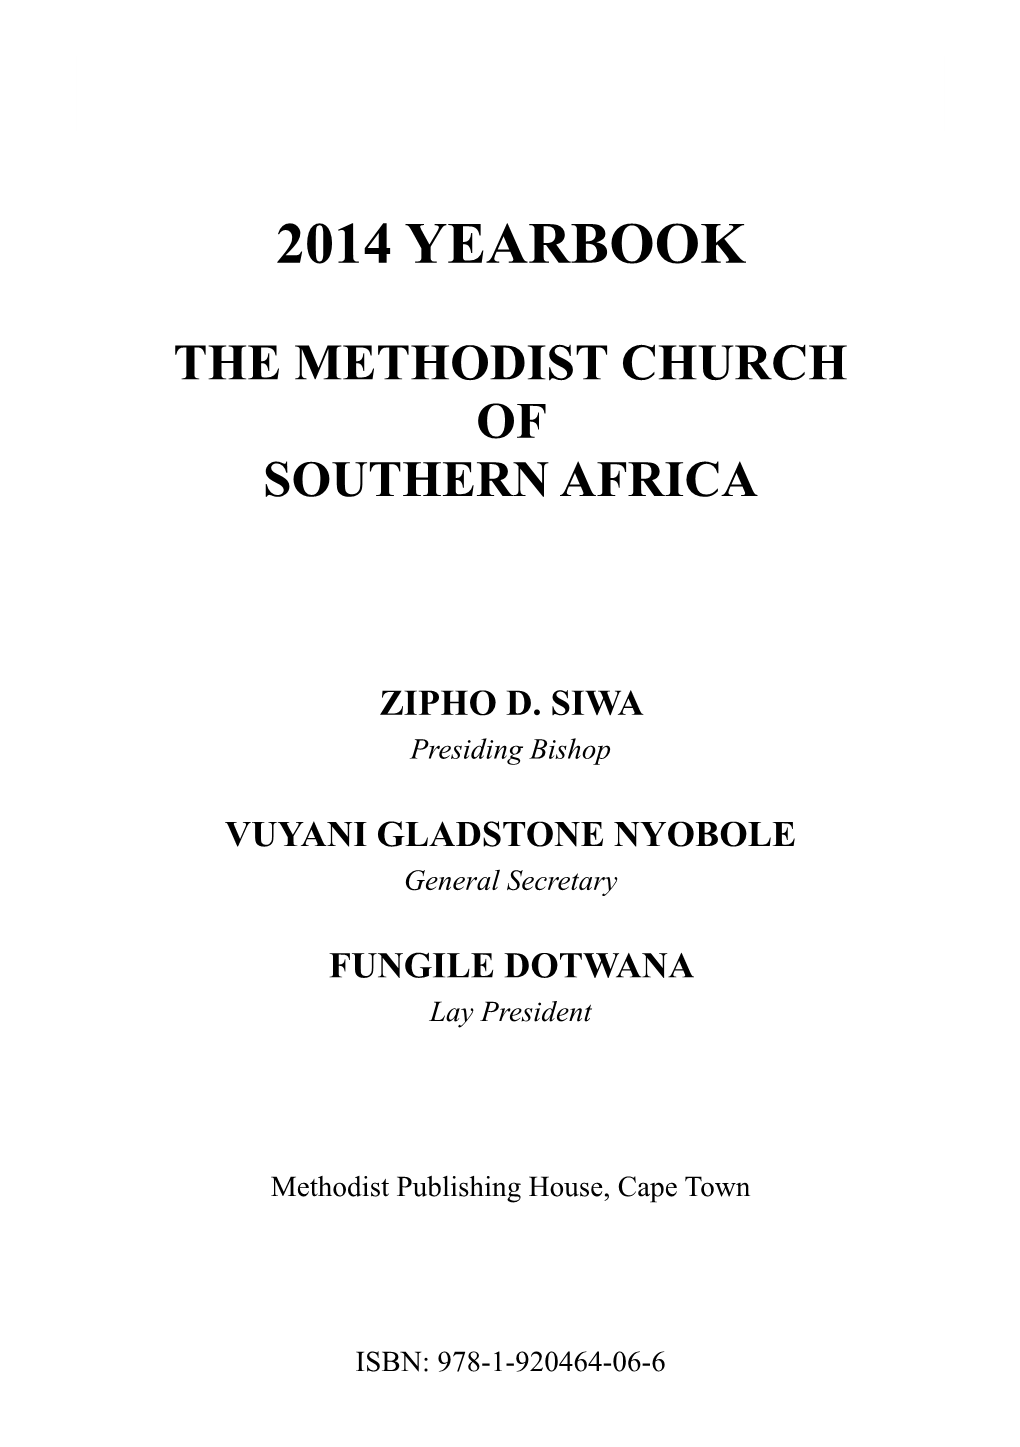 2014 Yearbook the Methodist Church of Southern Africa